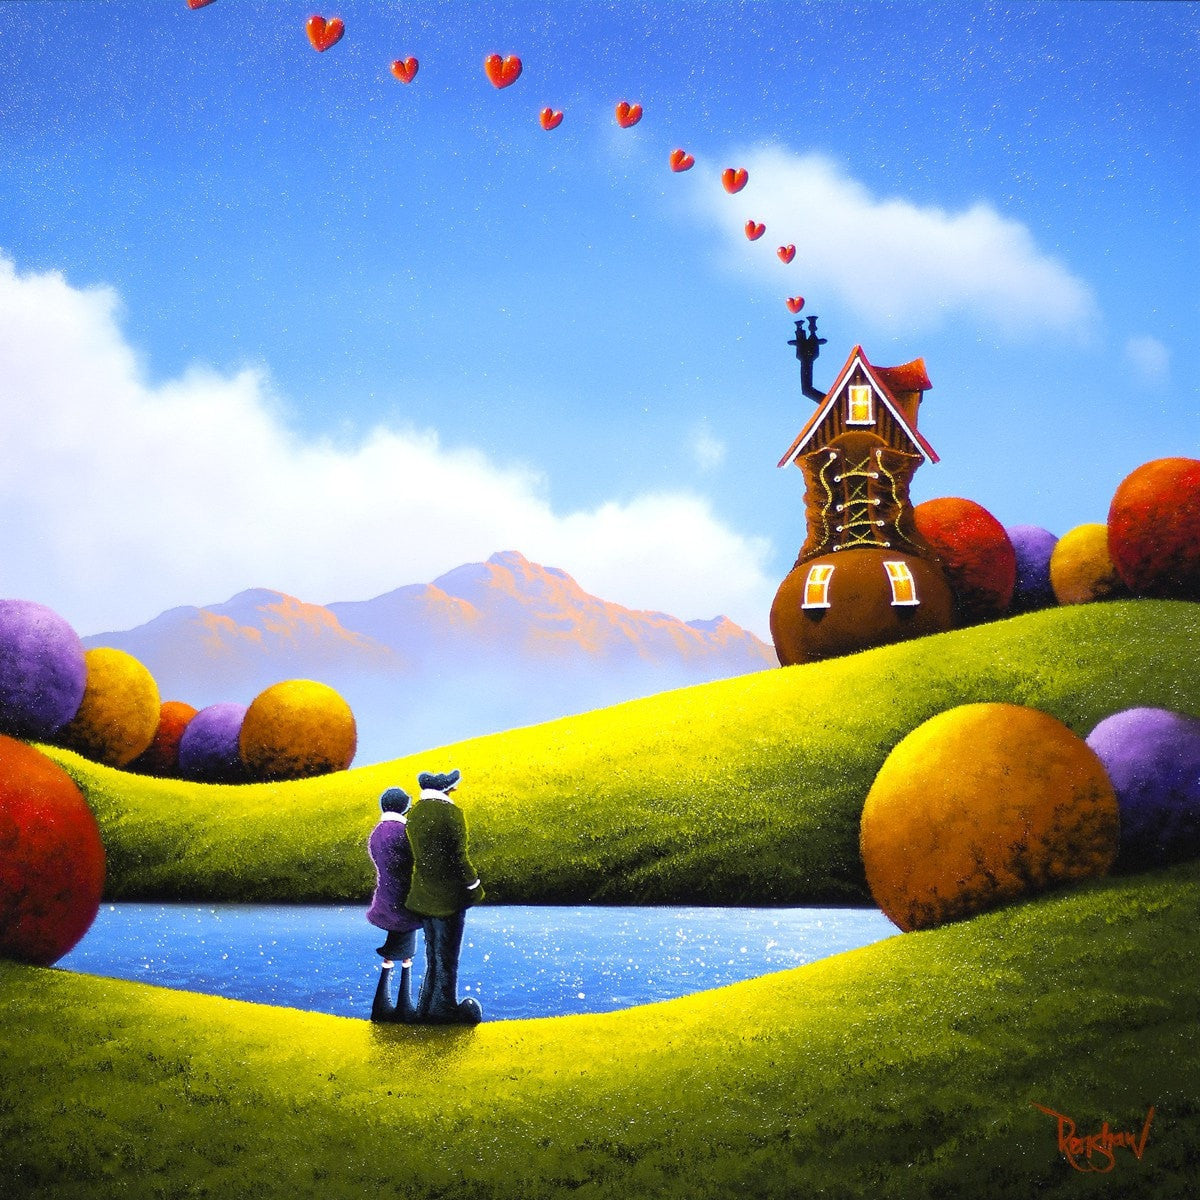 Welcome Home - SOLD David Renshaw